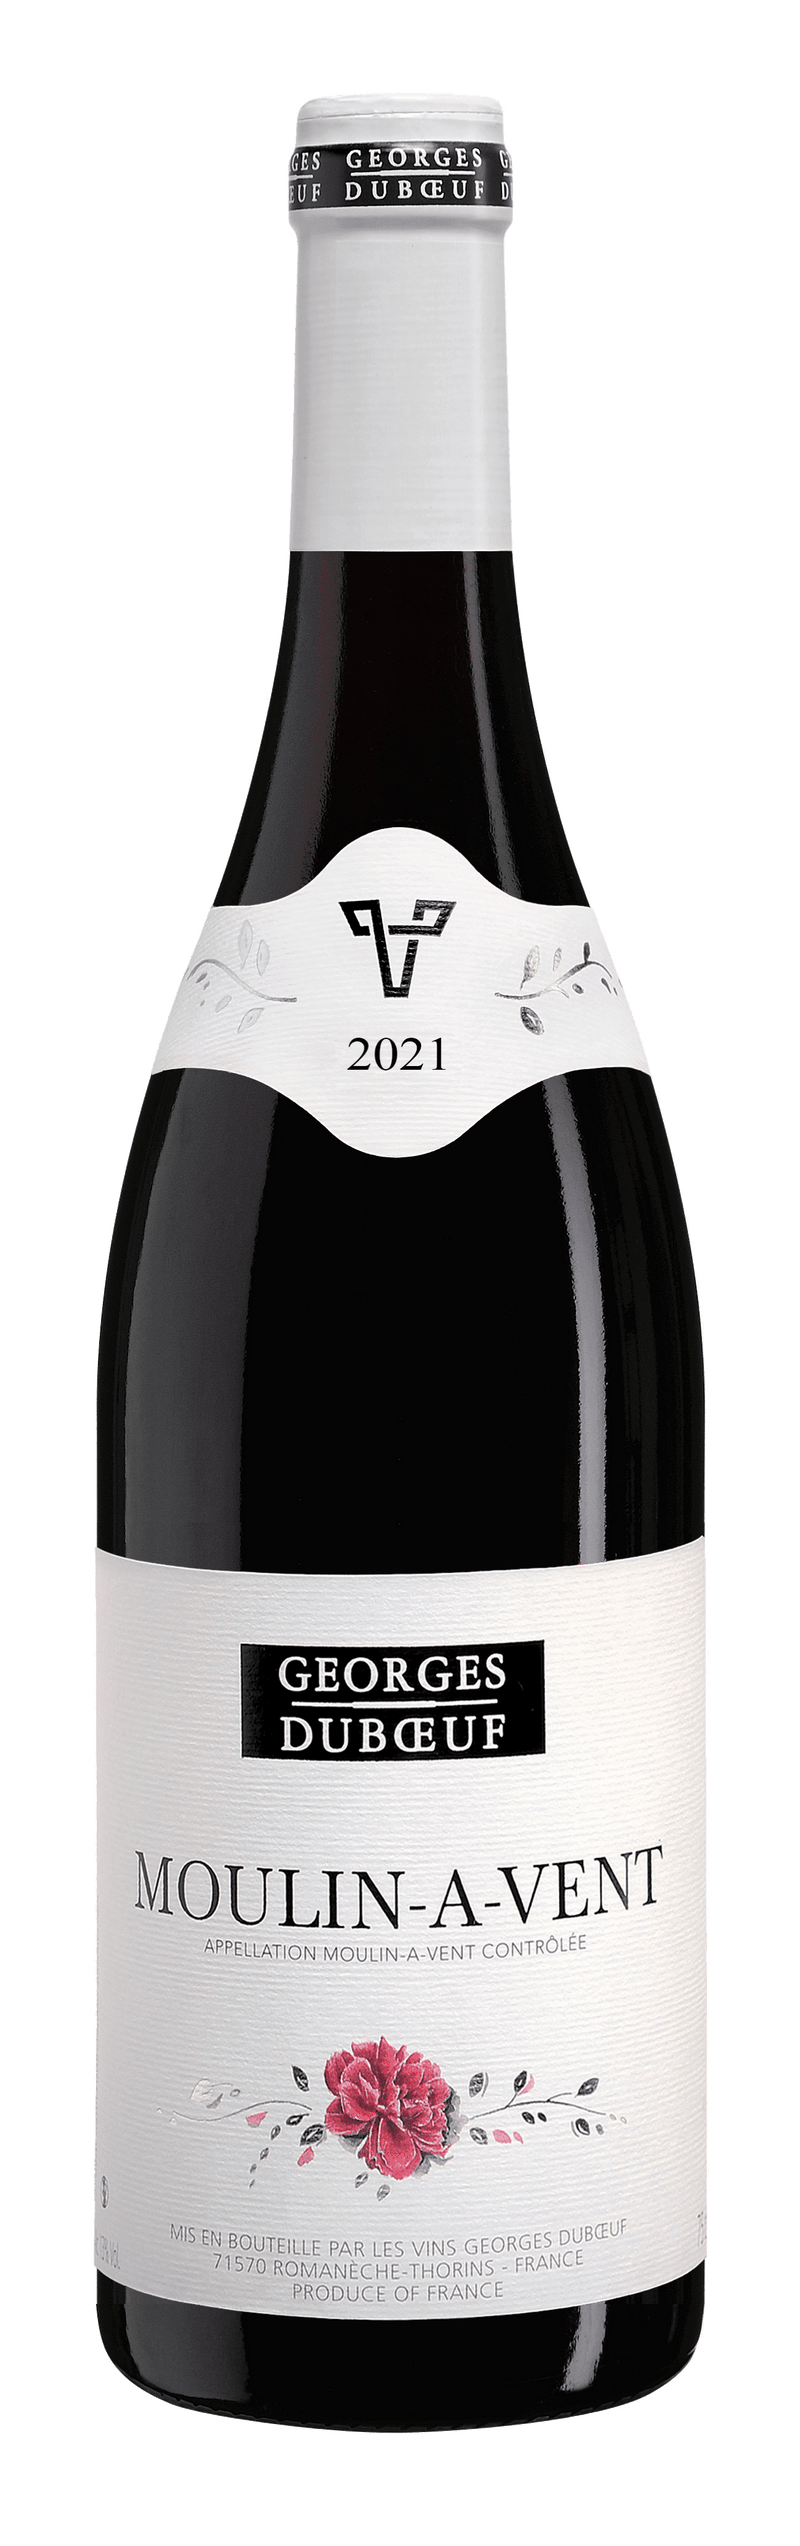 Georges Duboeuf Moulin-A-Vent 2021